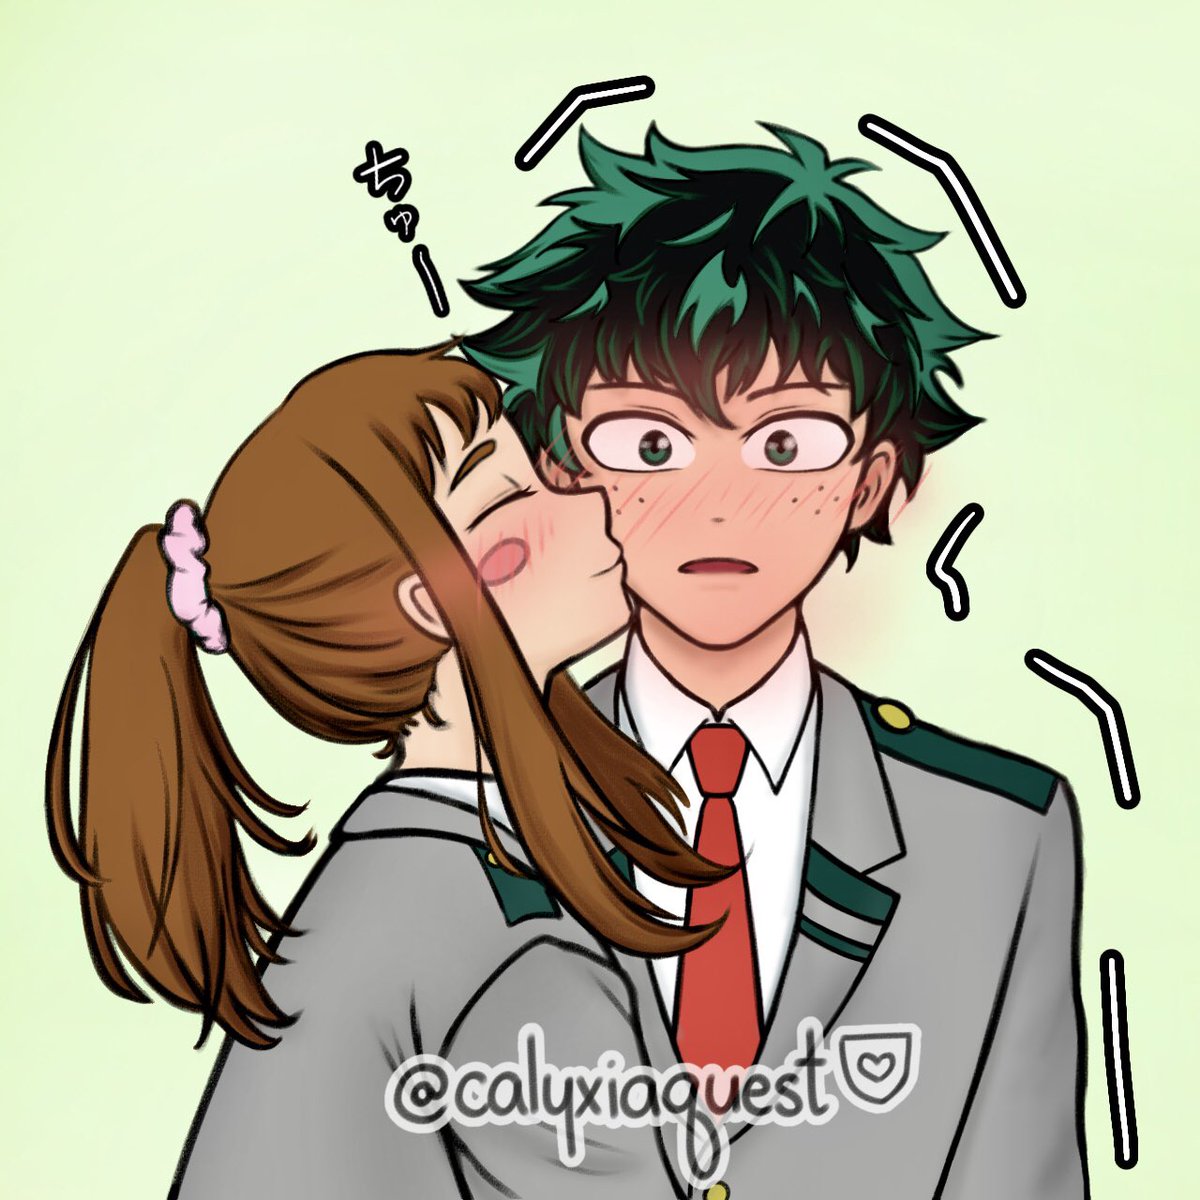 #izuochaweek2023
Day 5 : Stasis/Metamorphosis

I drew them as 3rd year students ('metamorphosis') and Ochako gave Izuku a kiss which caused him to freeze ('stasis') lol

To take him out of the trance, she kissed him again. (*≧∀≦*)

#izuocha #dekucha #dekuocha #dekuraka 🍵💕